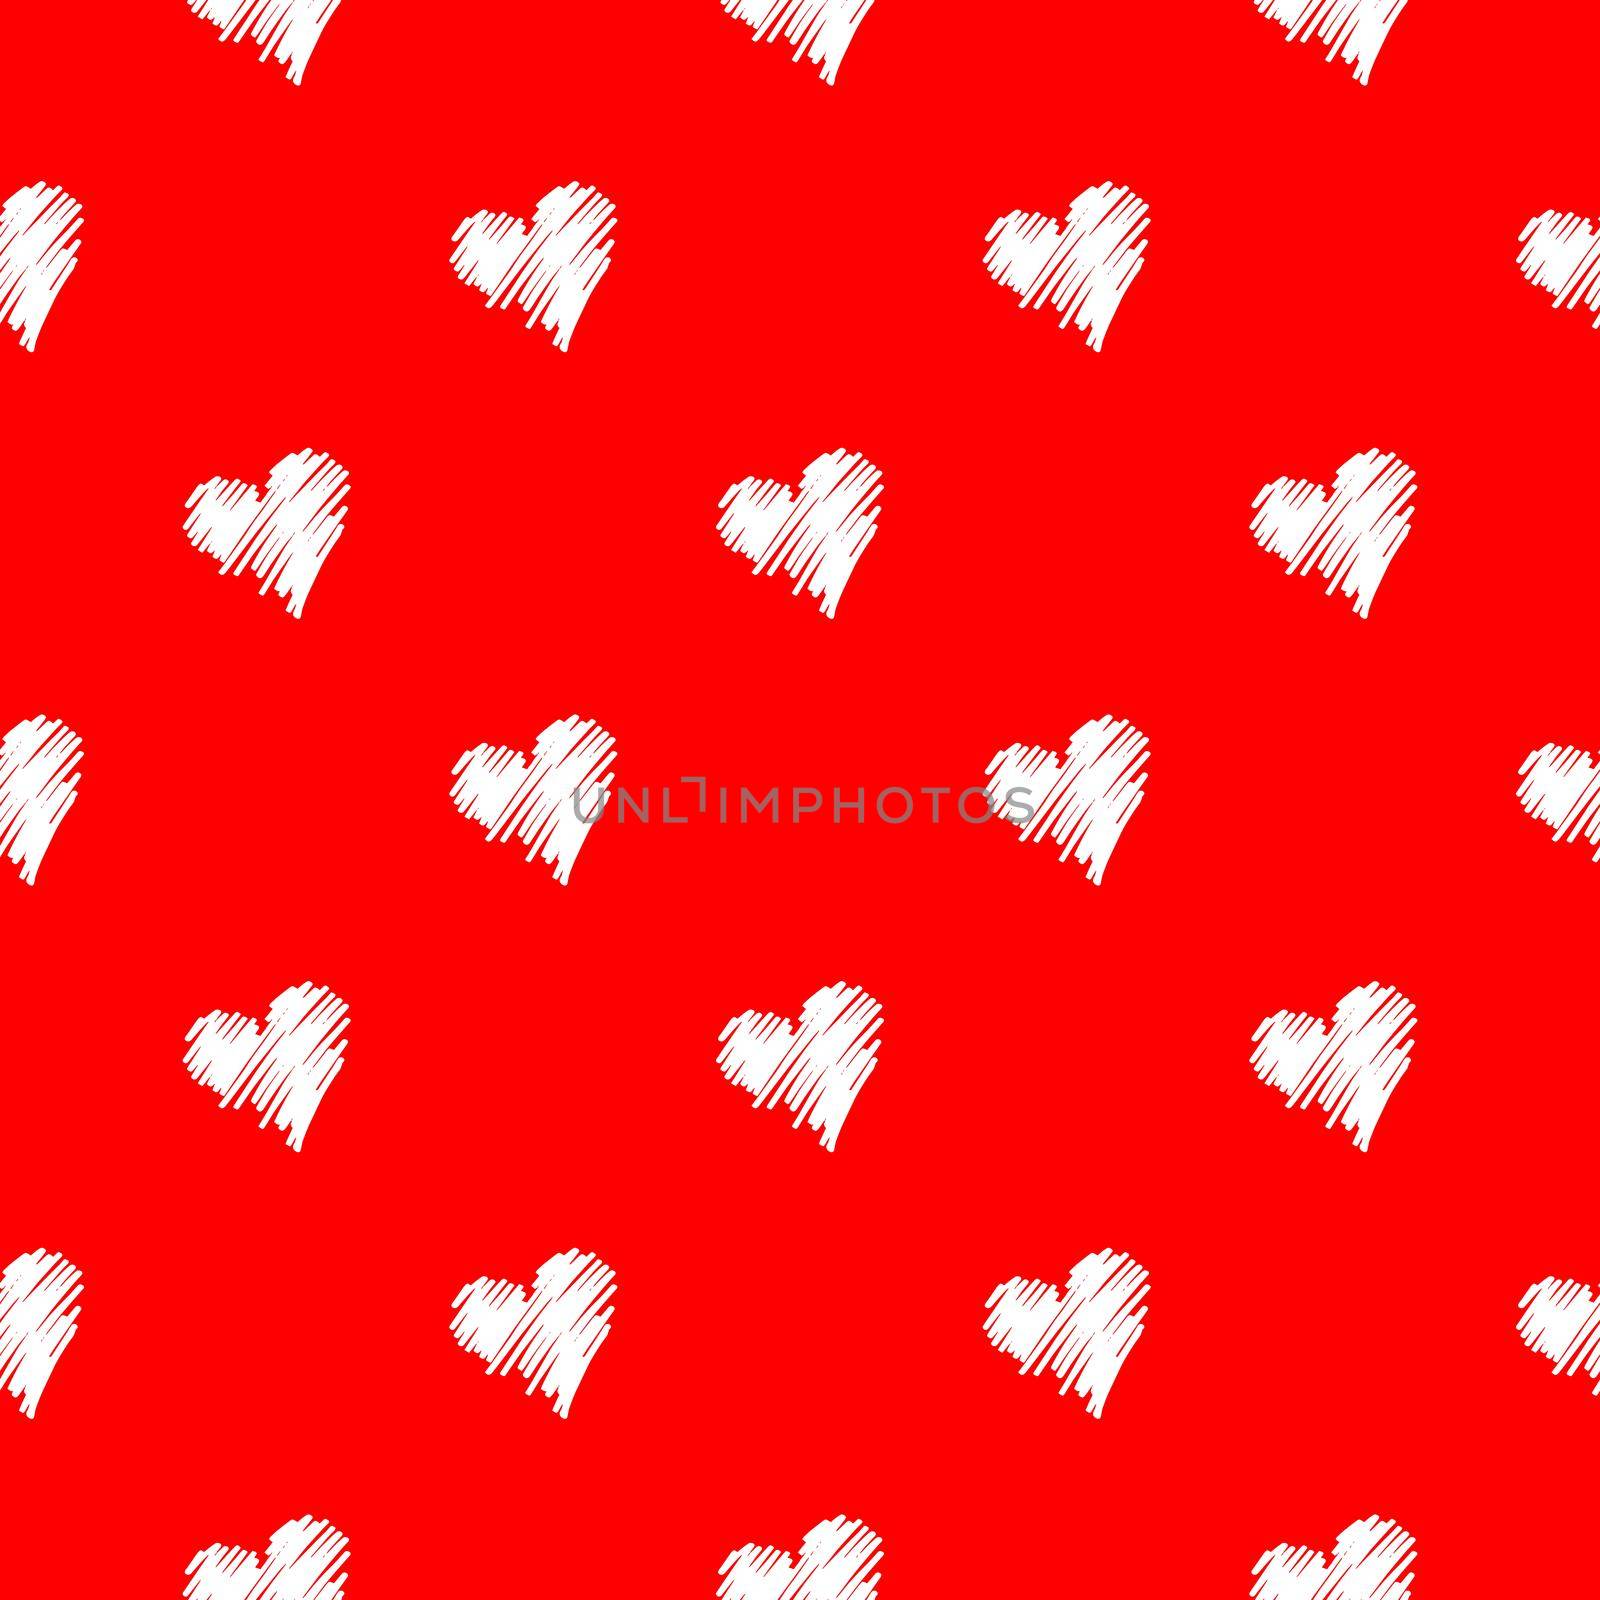 Heart shaped Seamless pattern for valentine's day, mother's day celebrations. Love related items. Home decoration printable. Design element, invitation, celebration related printable card by mrceviz